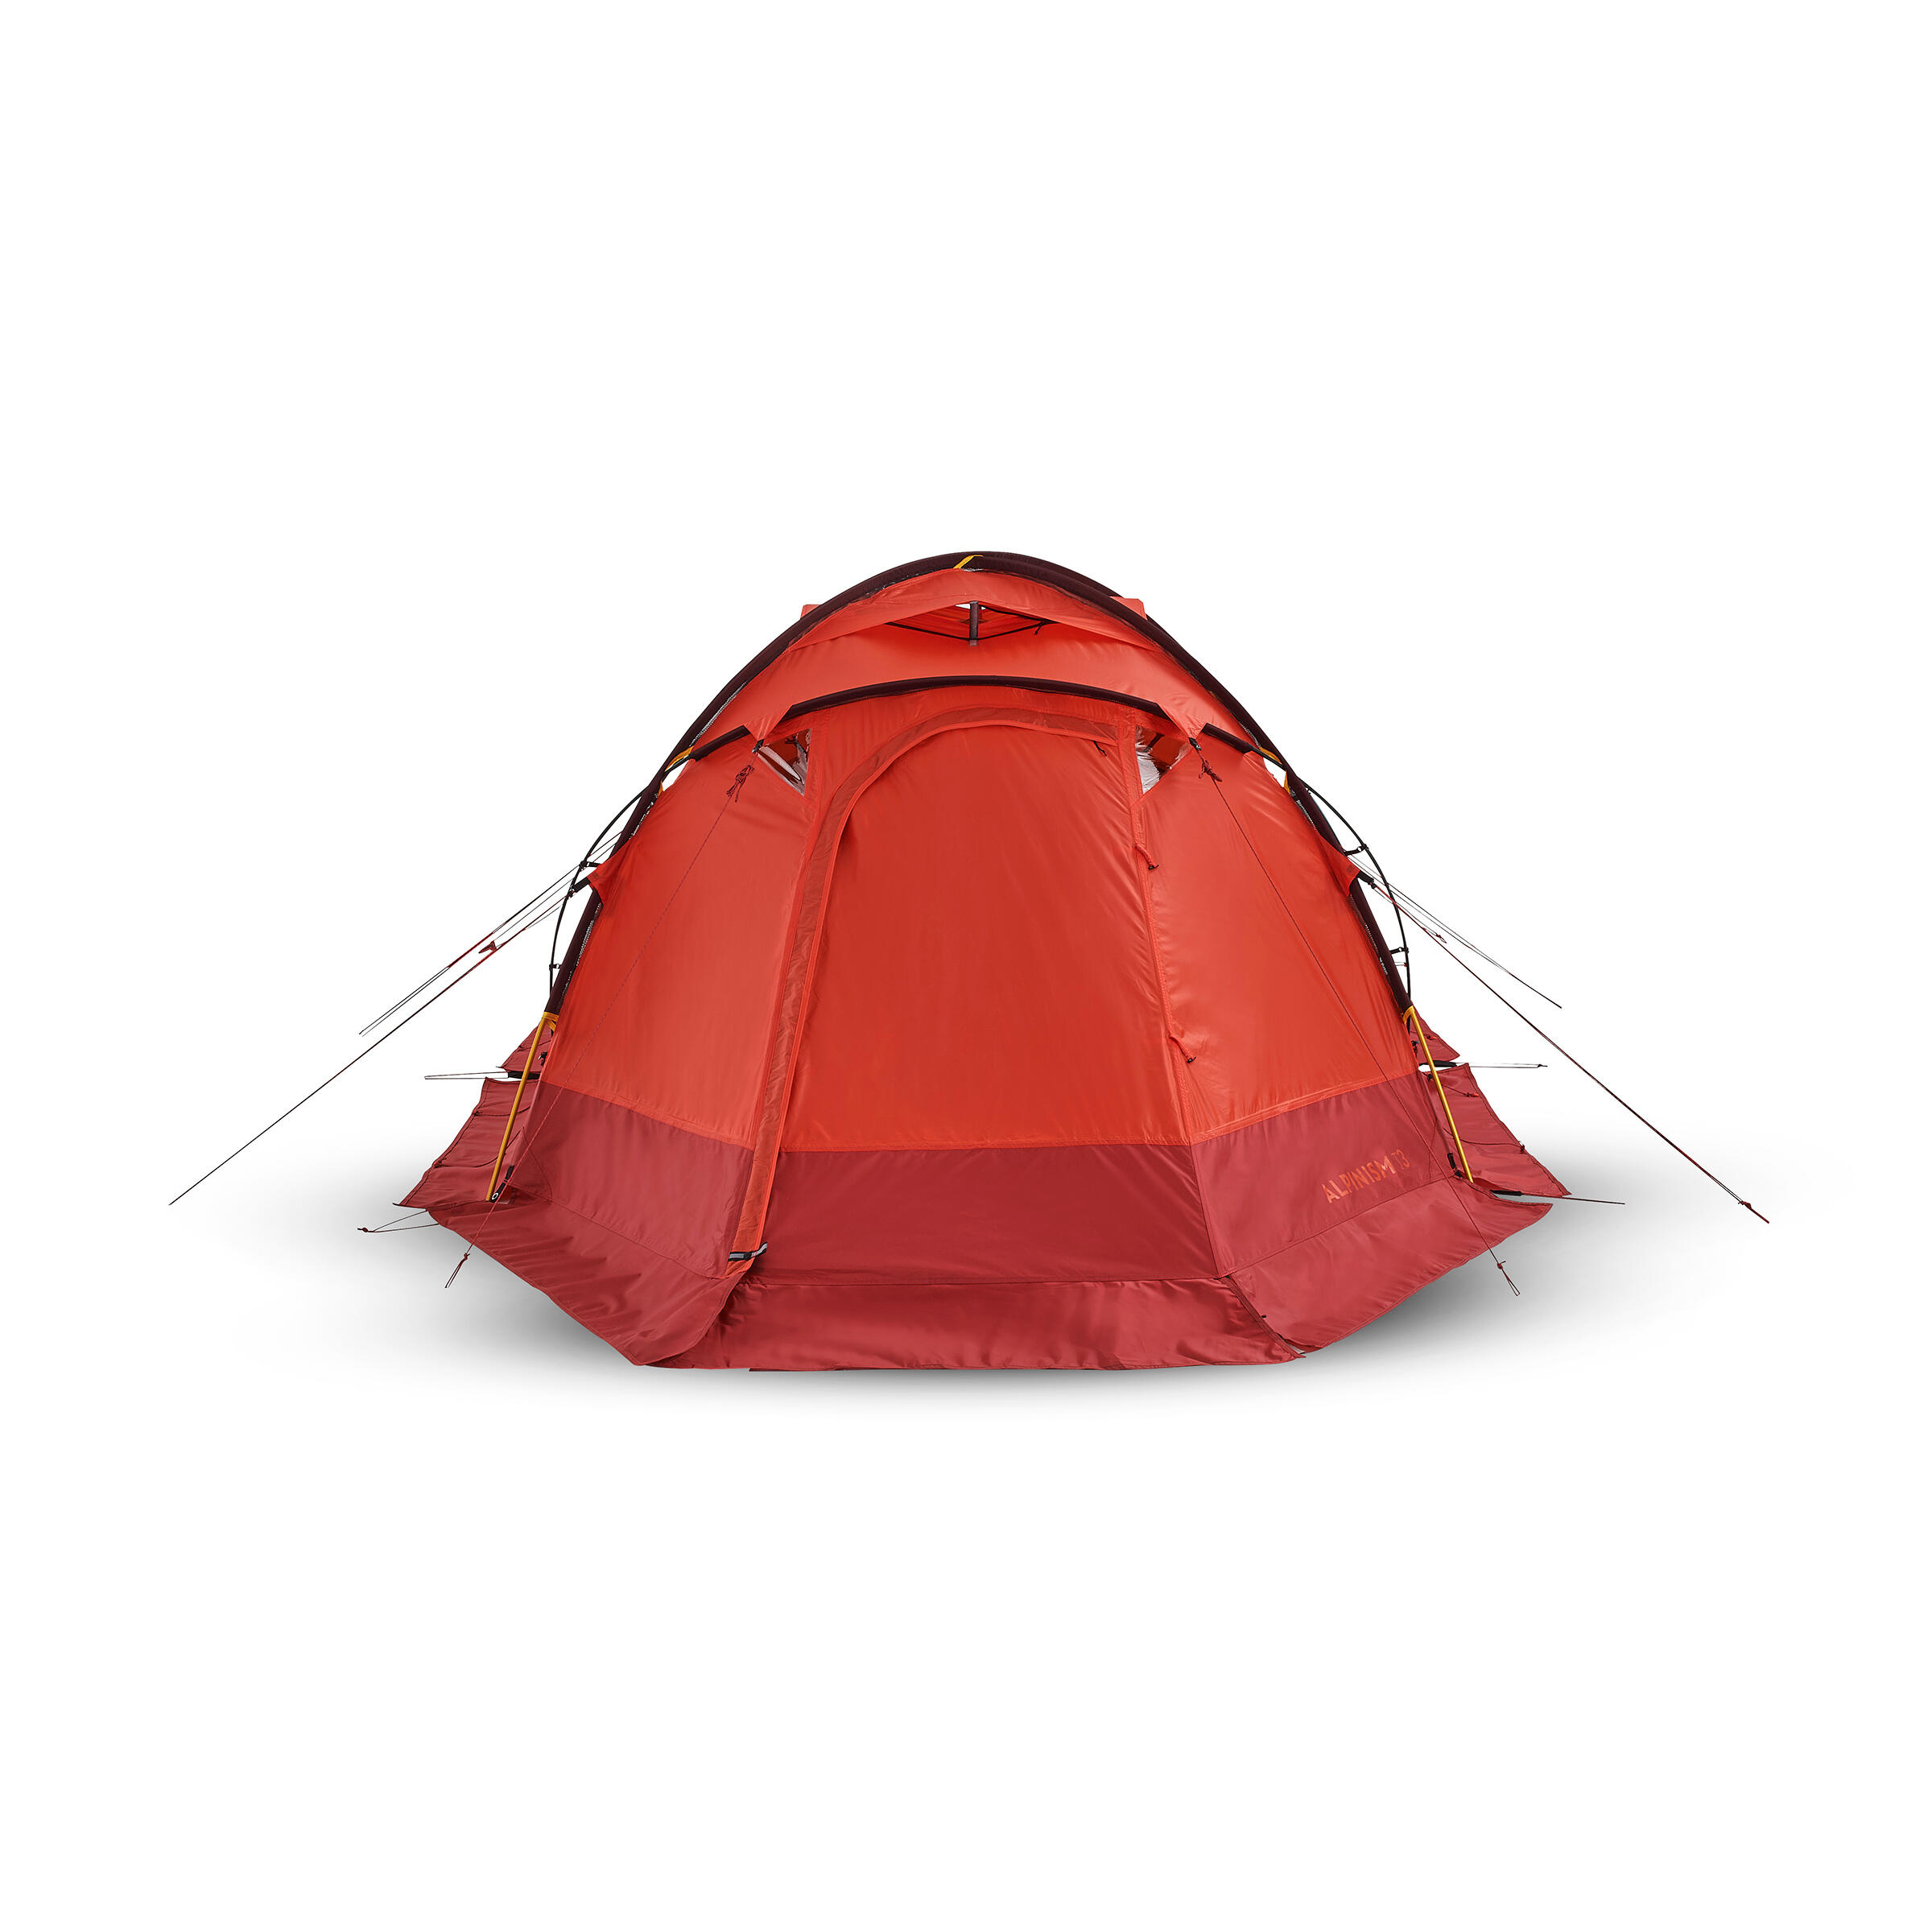 3-person mountaineering tent - Makalu T3 3/15